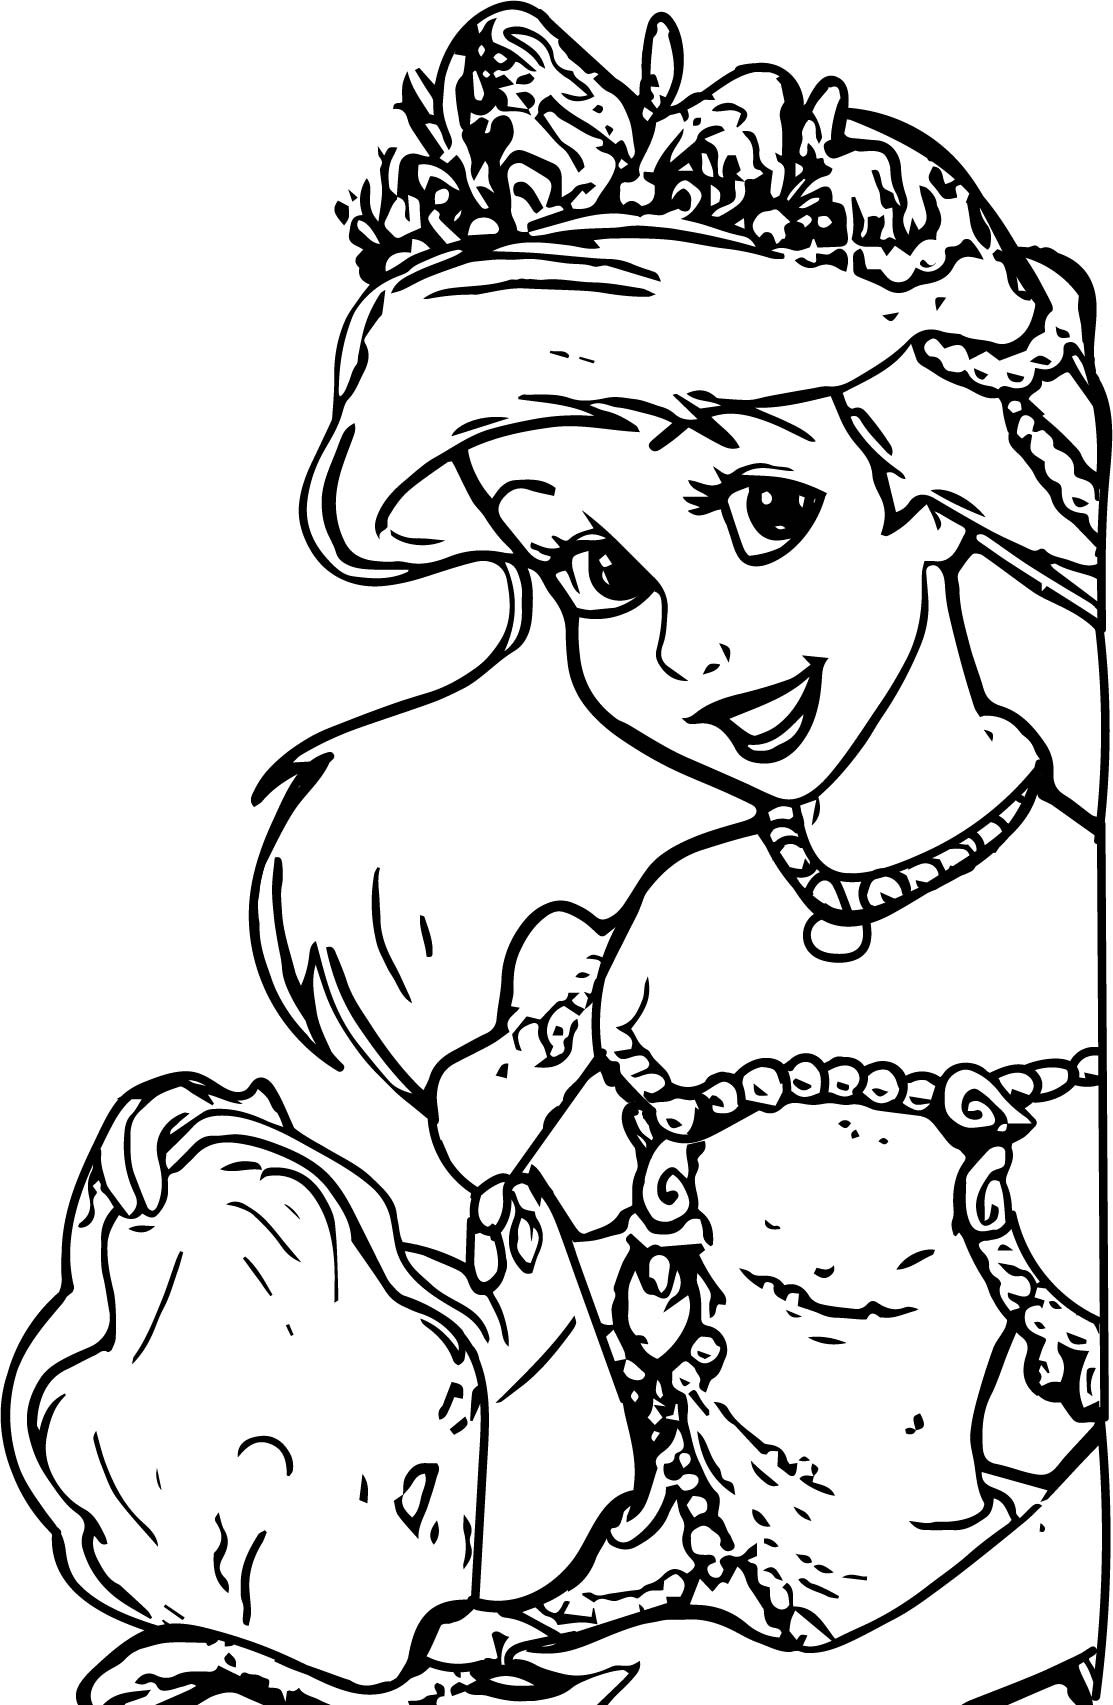 Disney Baby Princess Coloring Pages
 Baby Disney Princesses Coloring Pages at GetColorings